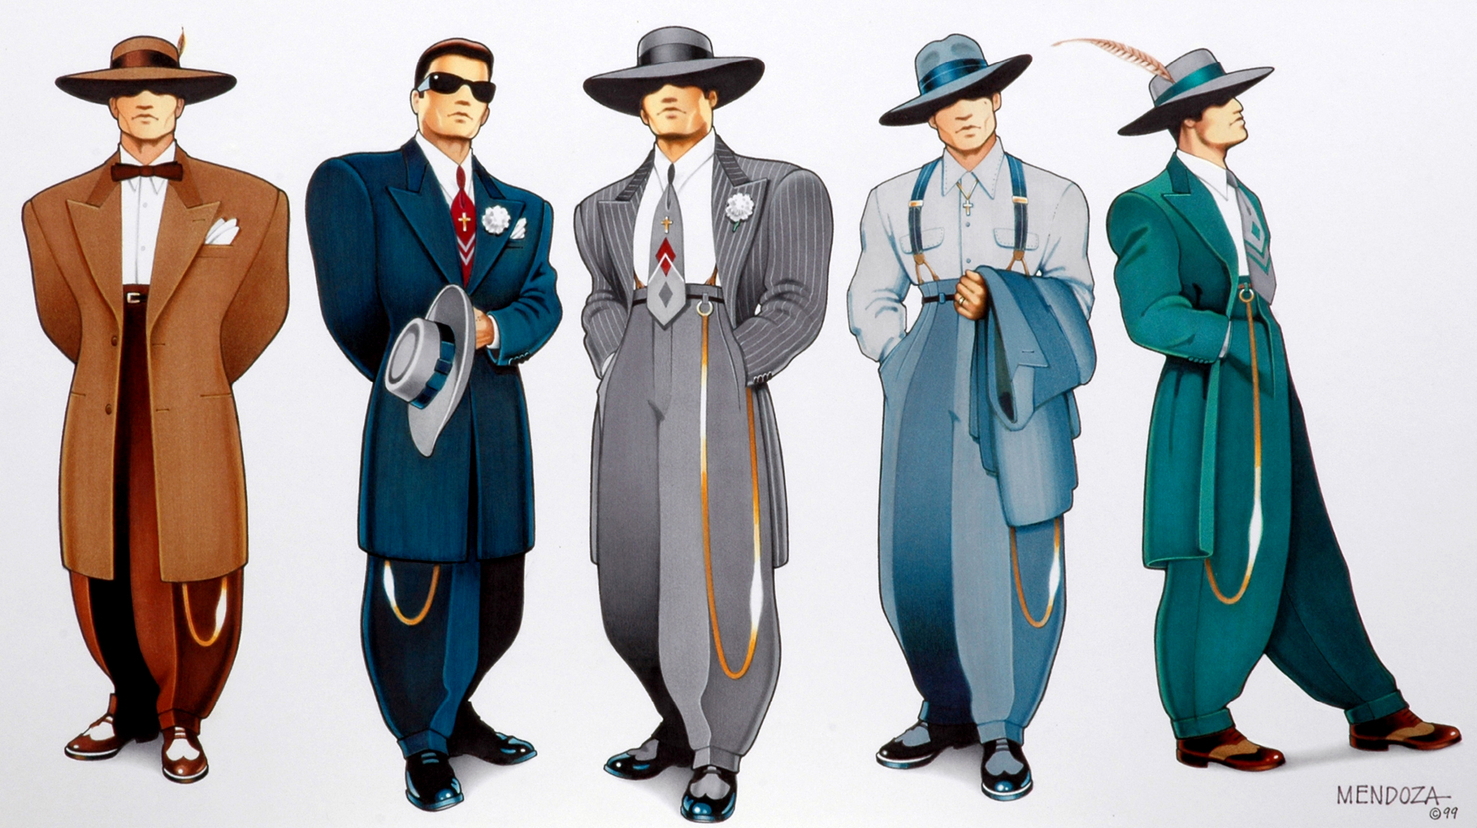 A Cultural History of the Zoot Suit